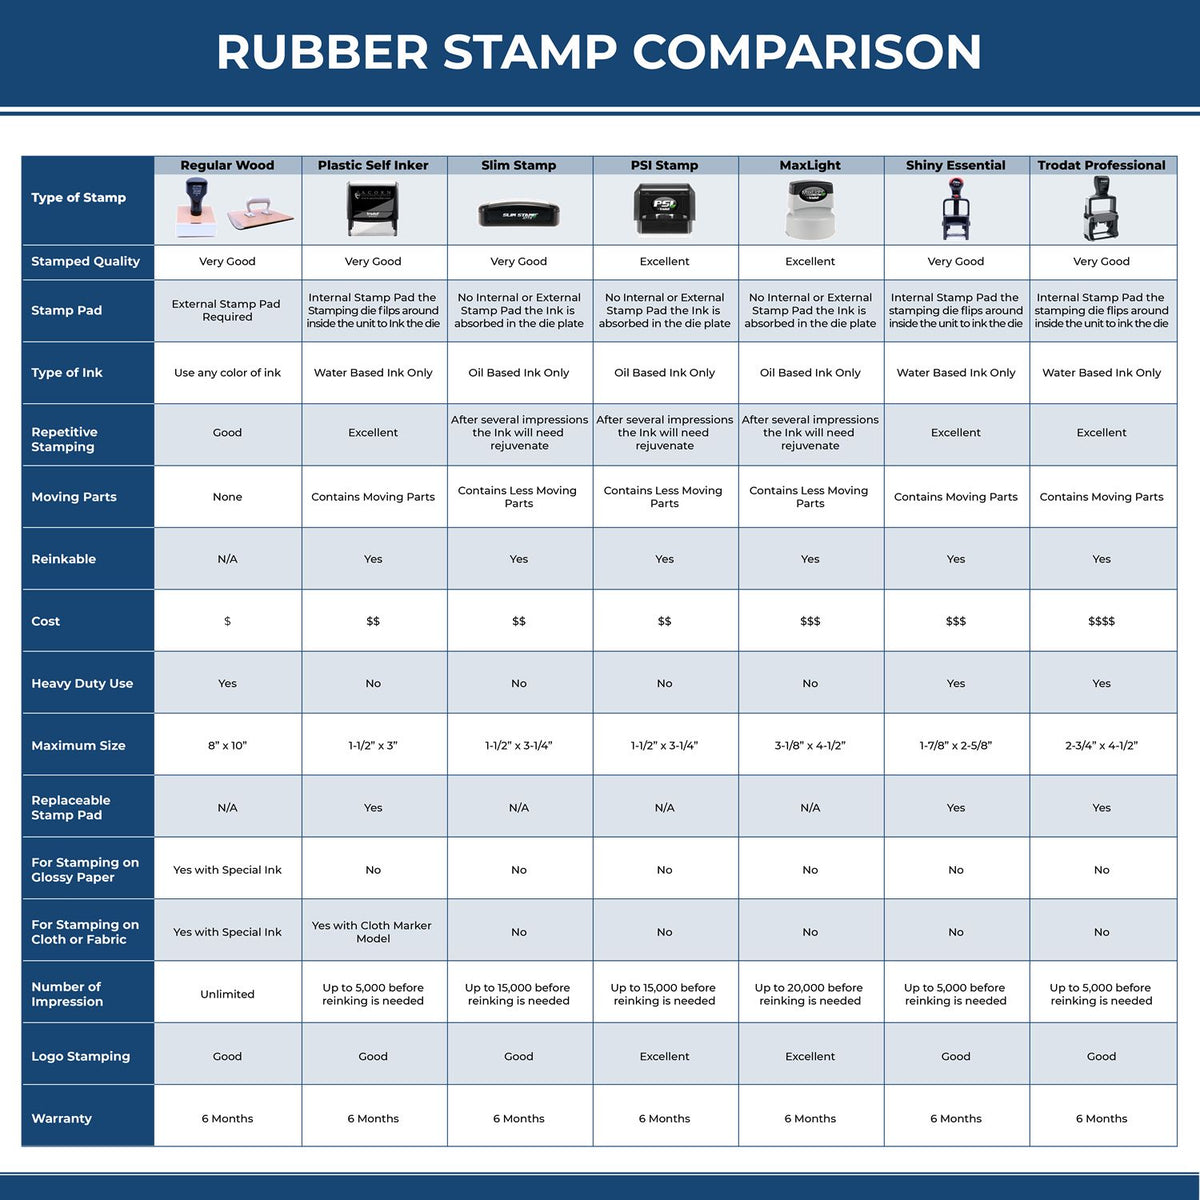 A comparison chart for the different types of mount models available for the Premium MaxLight Pre-Inked Maryland Engineering Stamp.